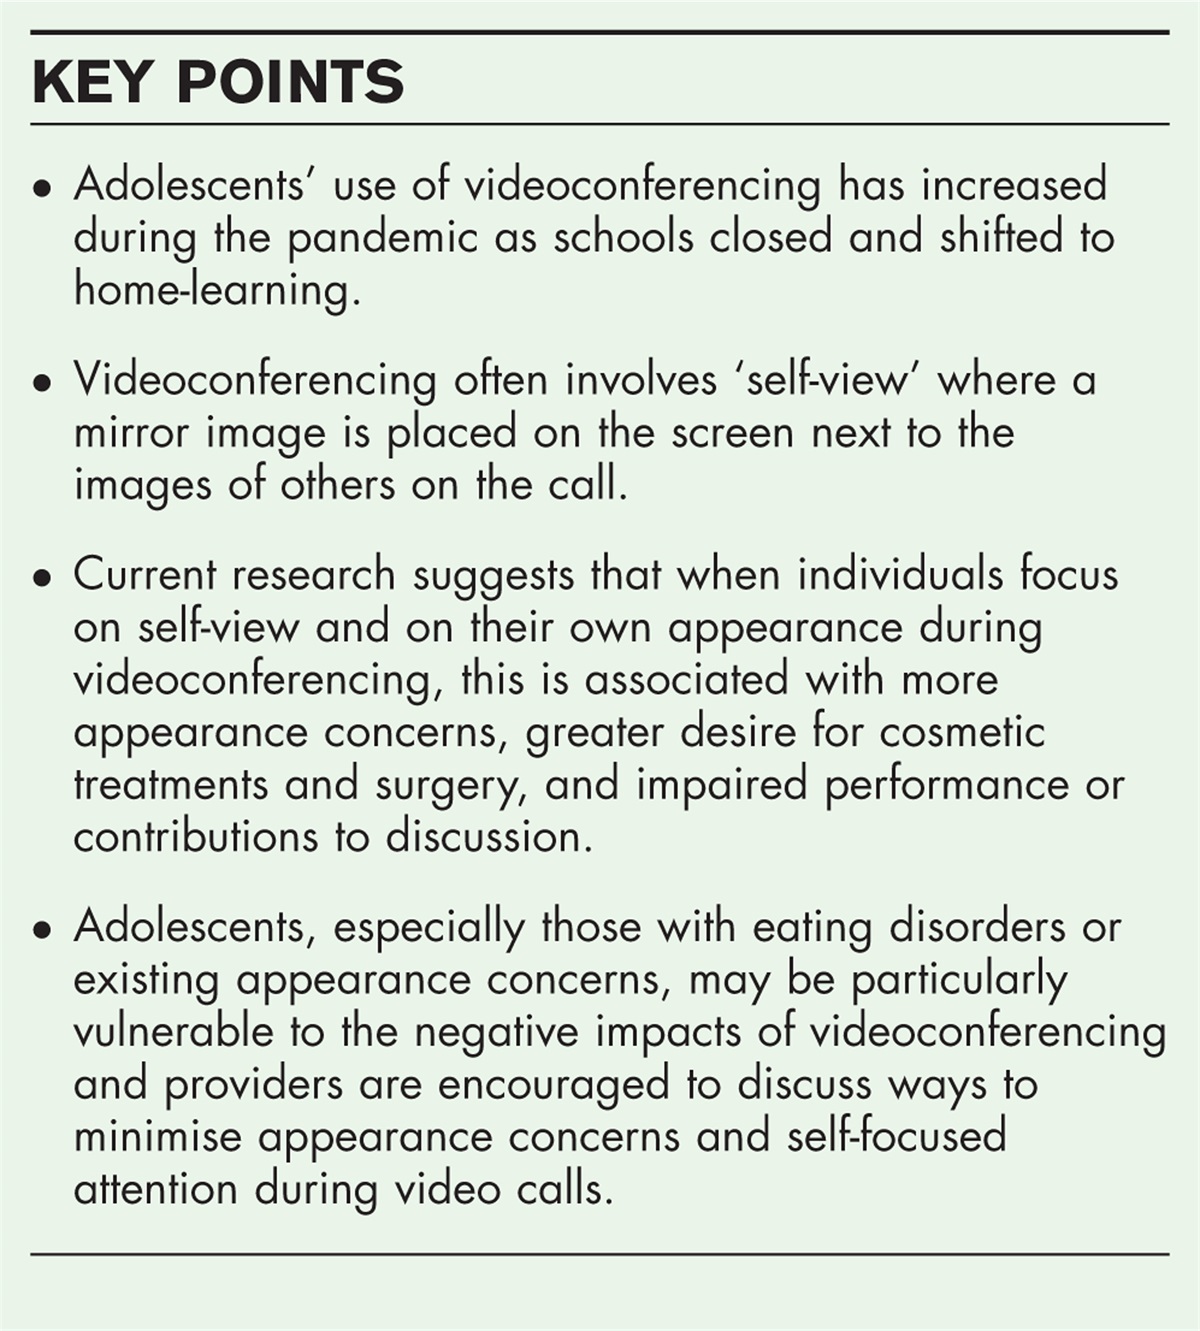 Zoomers: videoconferencing, appearance concerns, and potential effects on adolescents